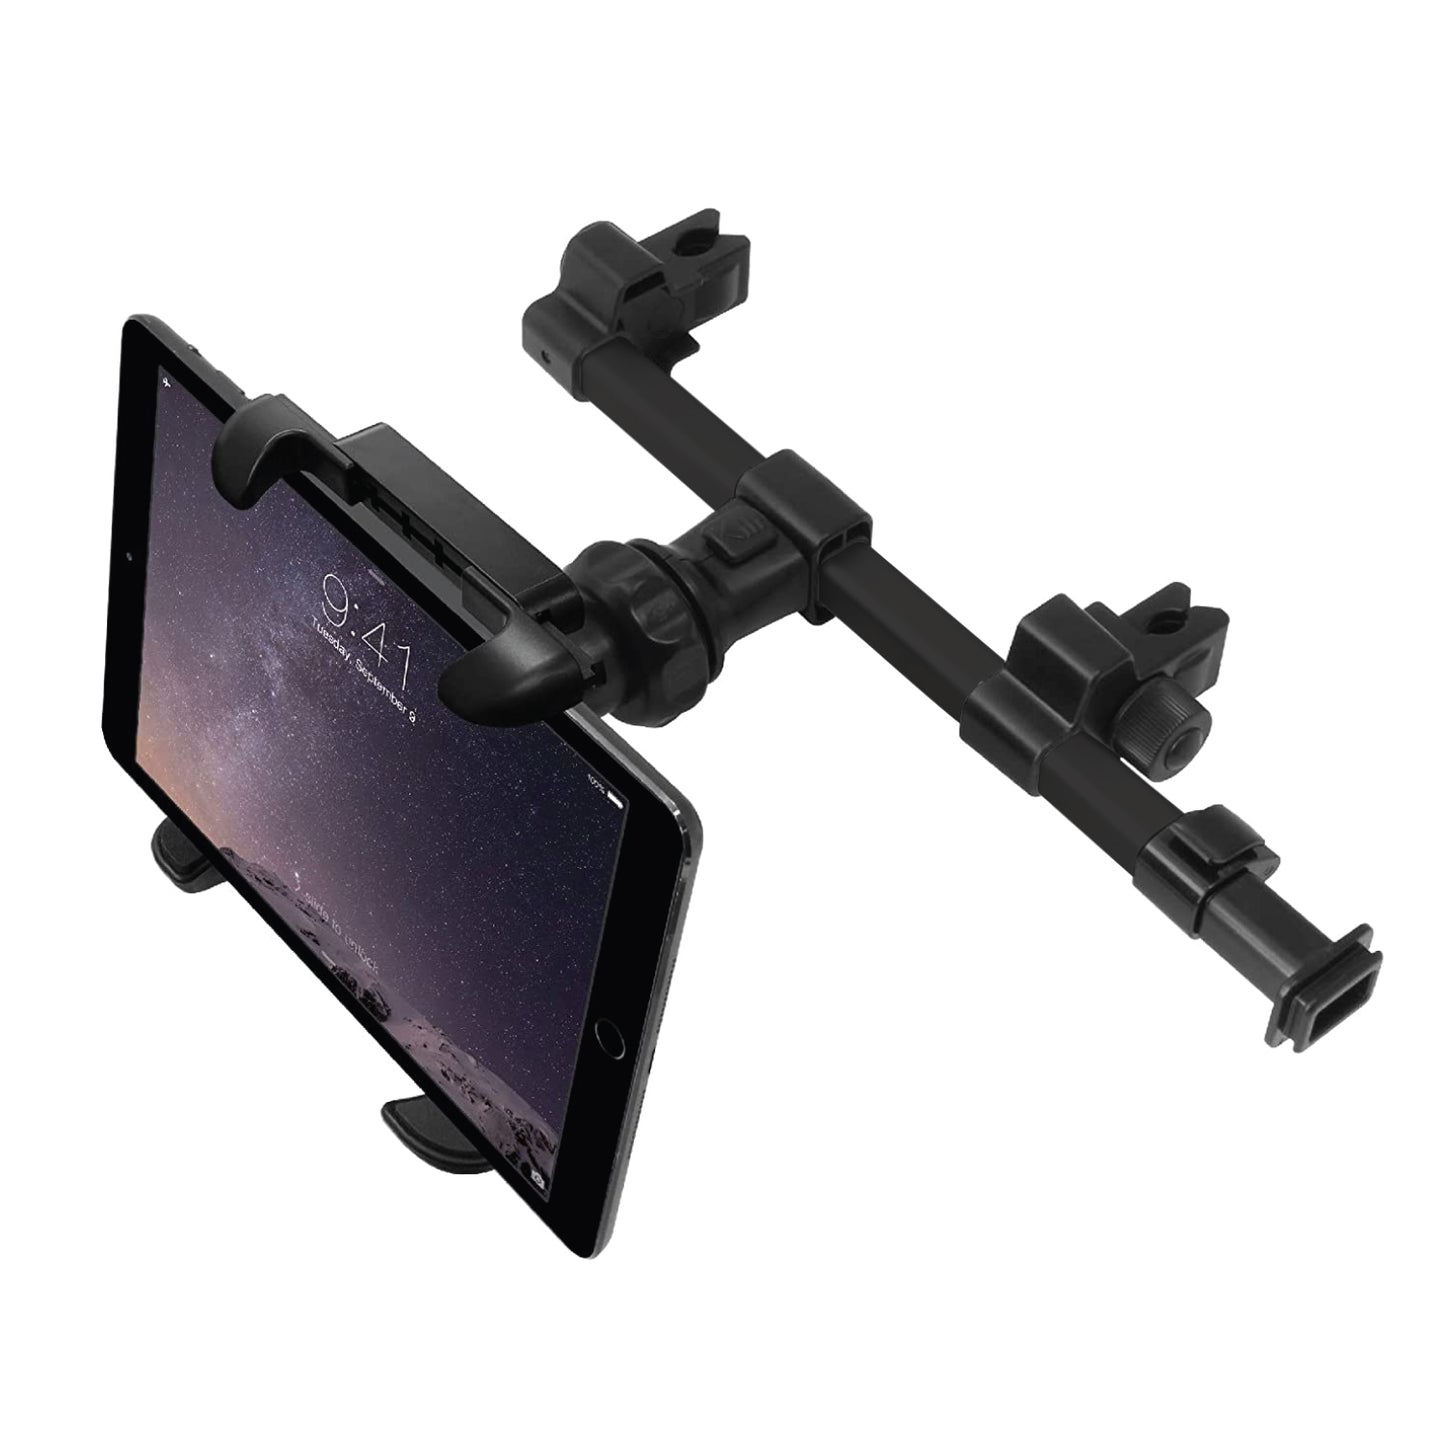 PH360 - Headrest Tablet/Smartphone iPad iPhone Holder, Mount Holder with Extendable Telescopic Arm for Apple iPad, iPhones (fits up to 10”) - Black